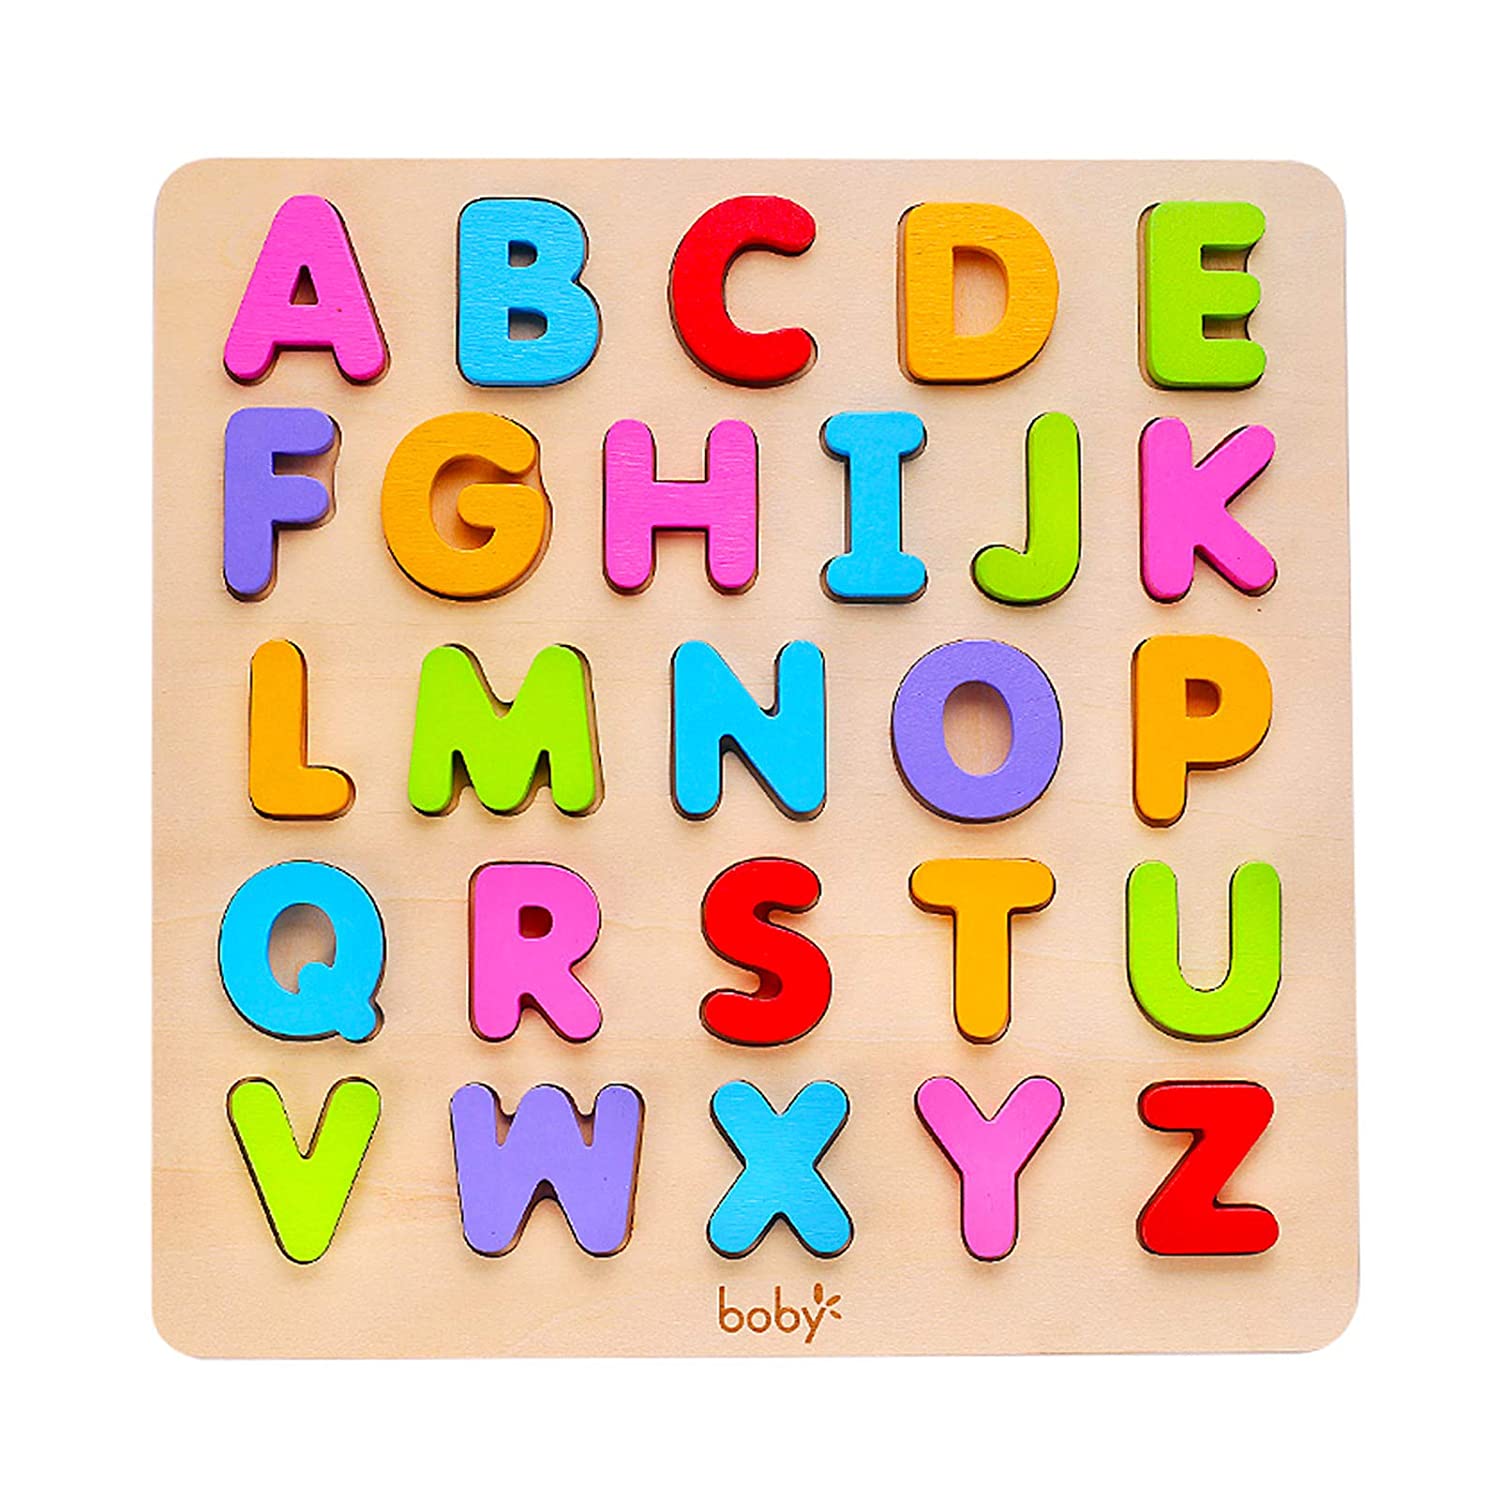 Alphabet Puzzles for Toddlers 1-3, Wooden ABC Letter Puzzles